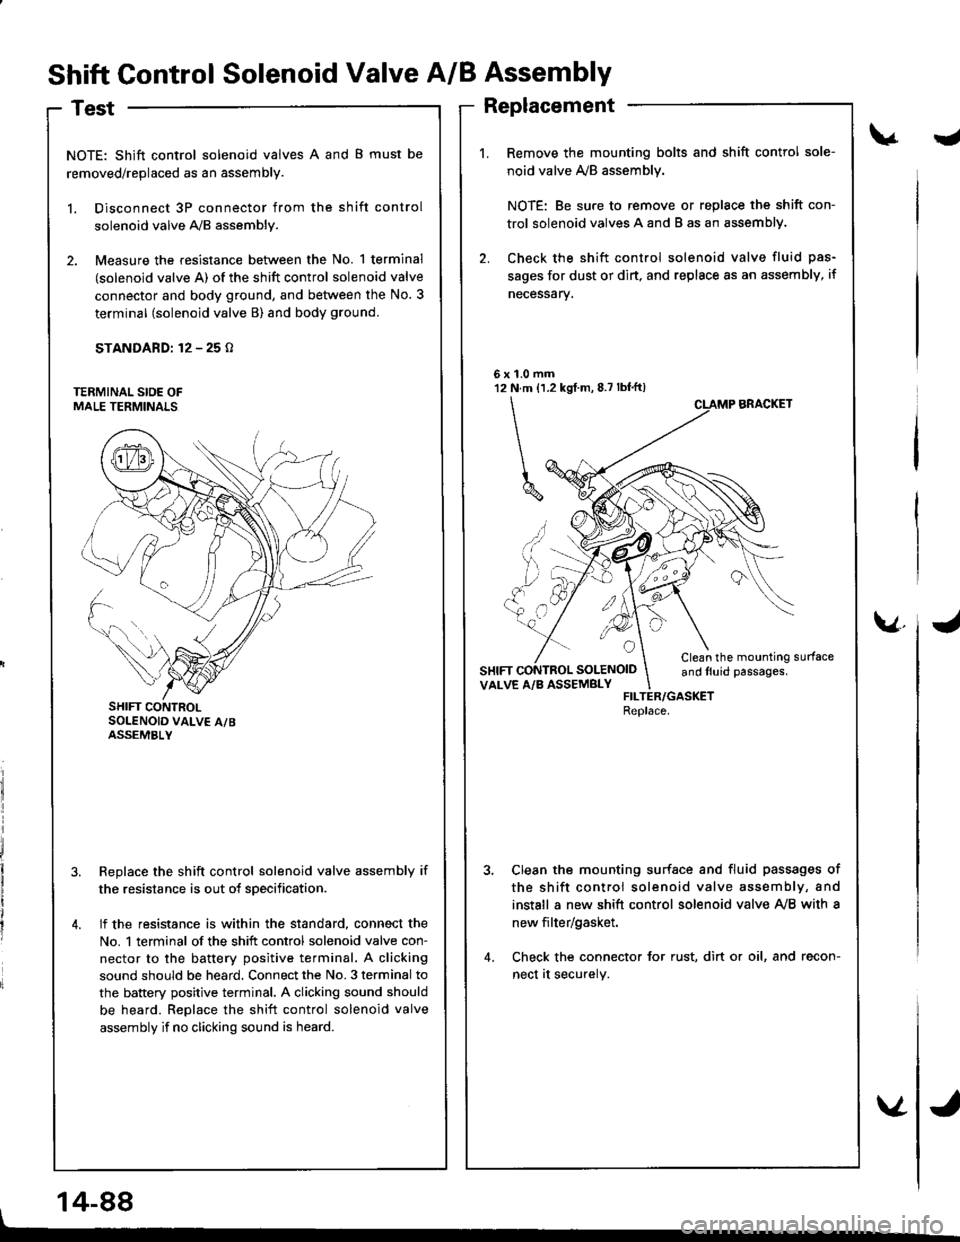 HONDA INTEGRA 1998 4.G Workshop Manual Shift Control Solenoid Valve A/B Assembly
Test
NOTE: Shift control solenoid valves A and B must be
removed/replaced as an assembly.
l. Disconnect 3P connector from the shift control
solenoid valve A,/